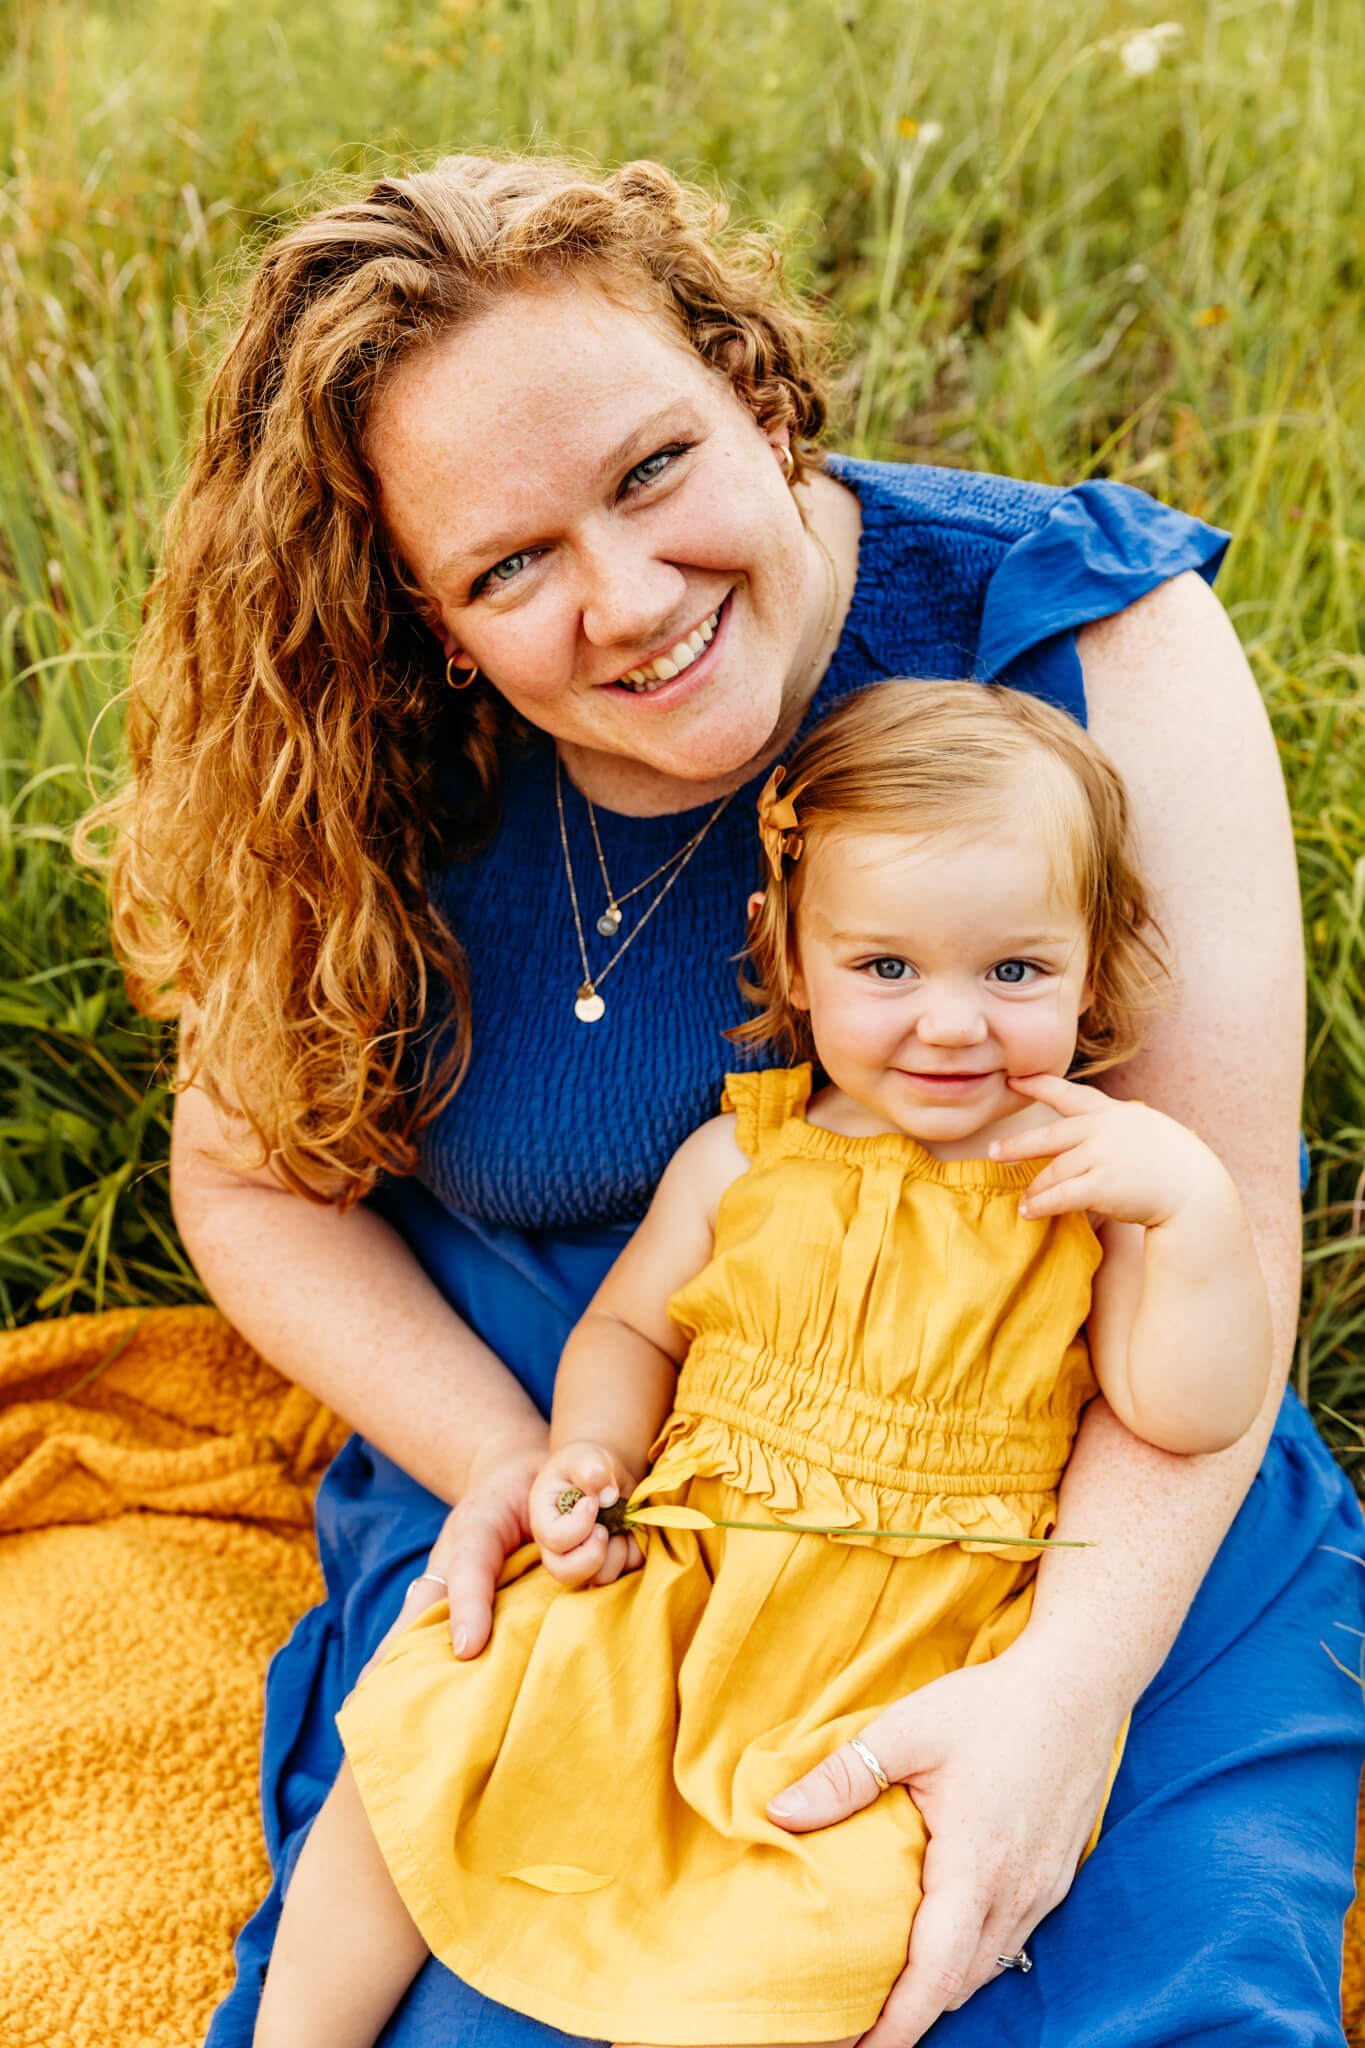 beautiful mama in a blue dress holding her baby girl in a yellow dress.